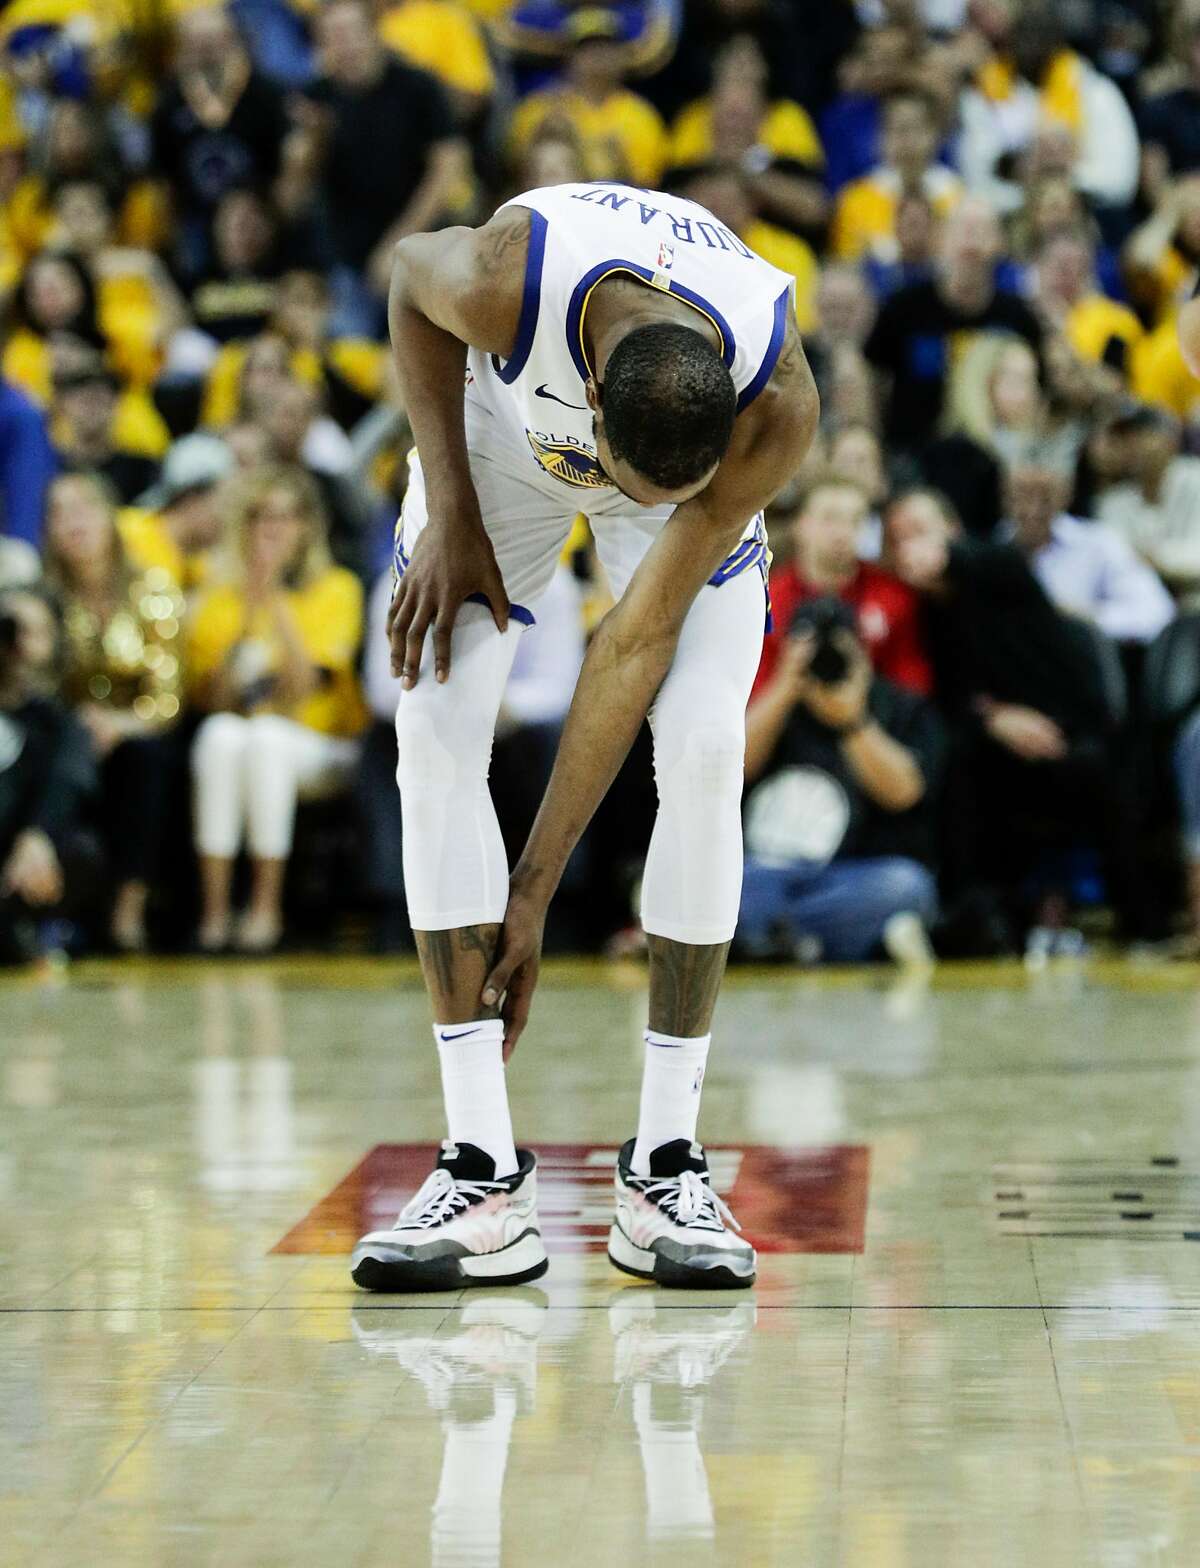 Golden State Warriors Kevin Durant checks his leg in the third quarter during game 5 of the Western Conference Semifinals between the Golden State Warriors and the Houston Rockets at Oracle Arena on Wednesday, May 8, 2019 in Oakland, Calif.